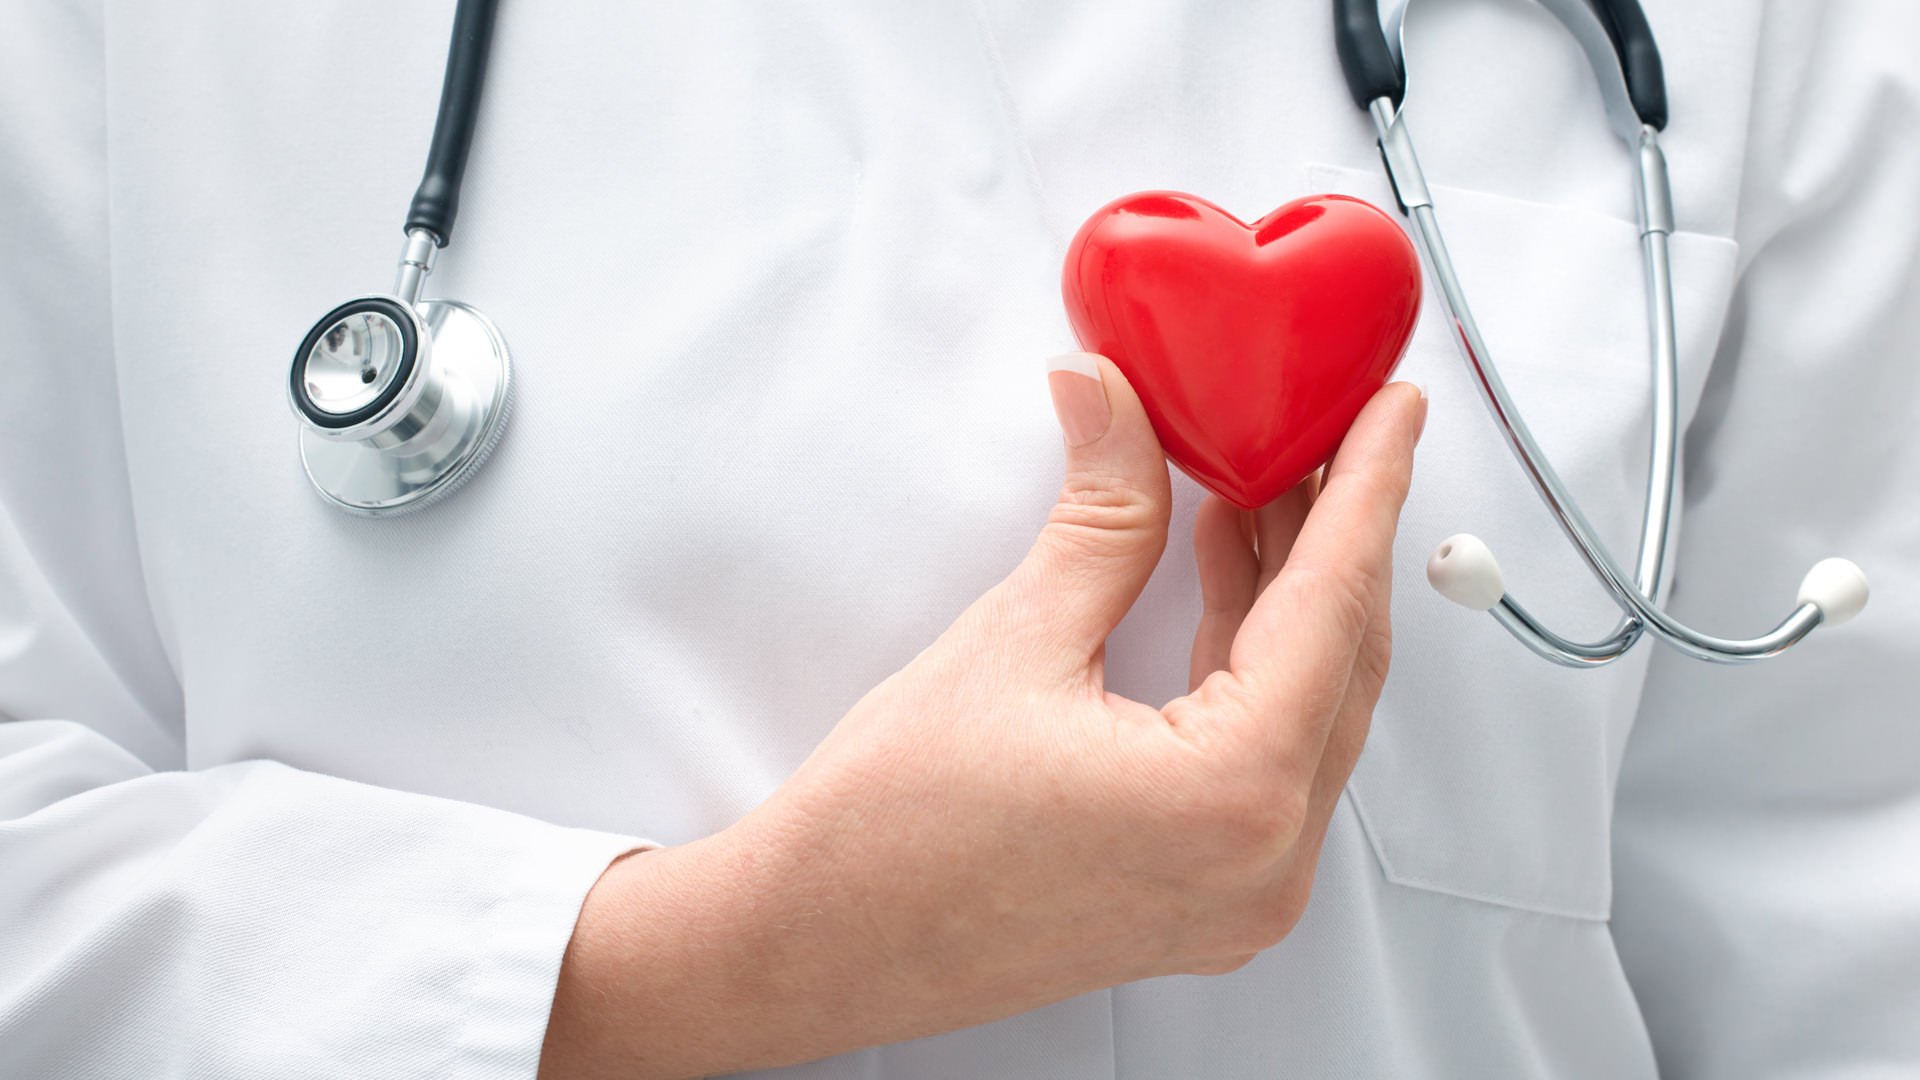 The cardiology center can provide you with direct care convenience